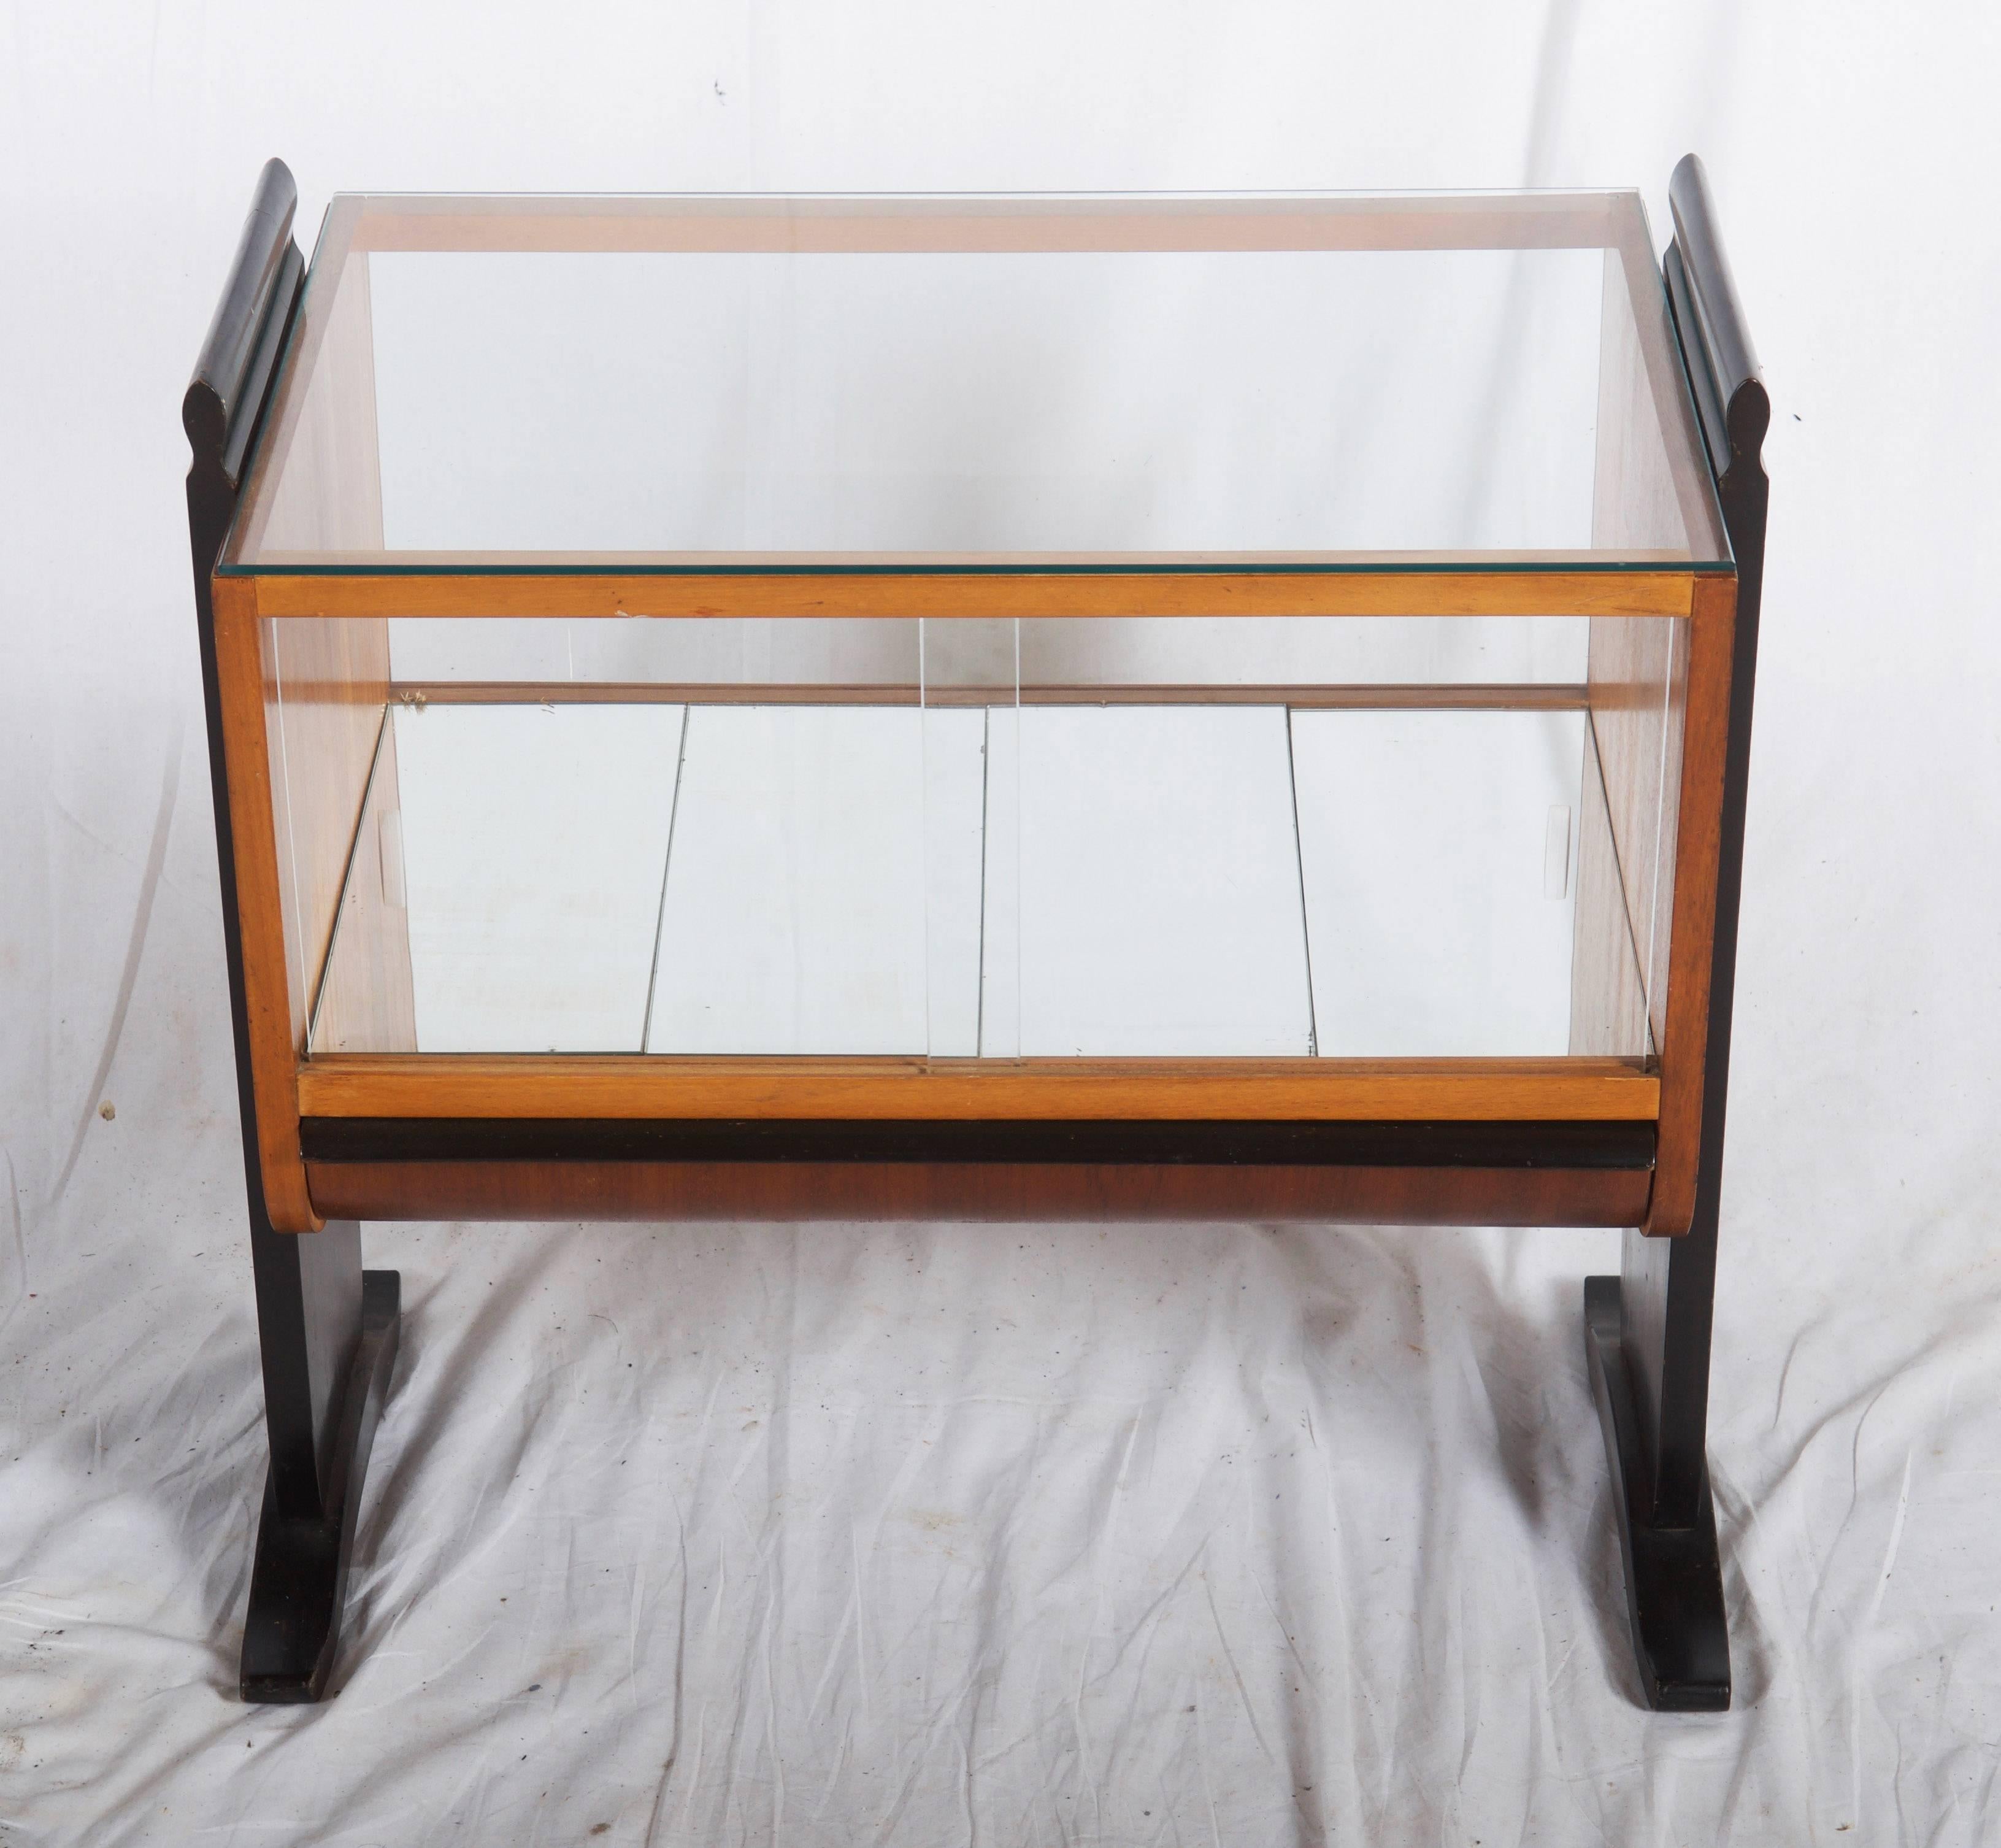 Beech with walnut veneer, side parts/legs black lacquered. Glass top and sides, mirror bottom. Original excellent condition. Designed in the 1930s by Jindrich Halabala for Spojene UP-Zavody, Czechoslovakia. On request two additional